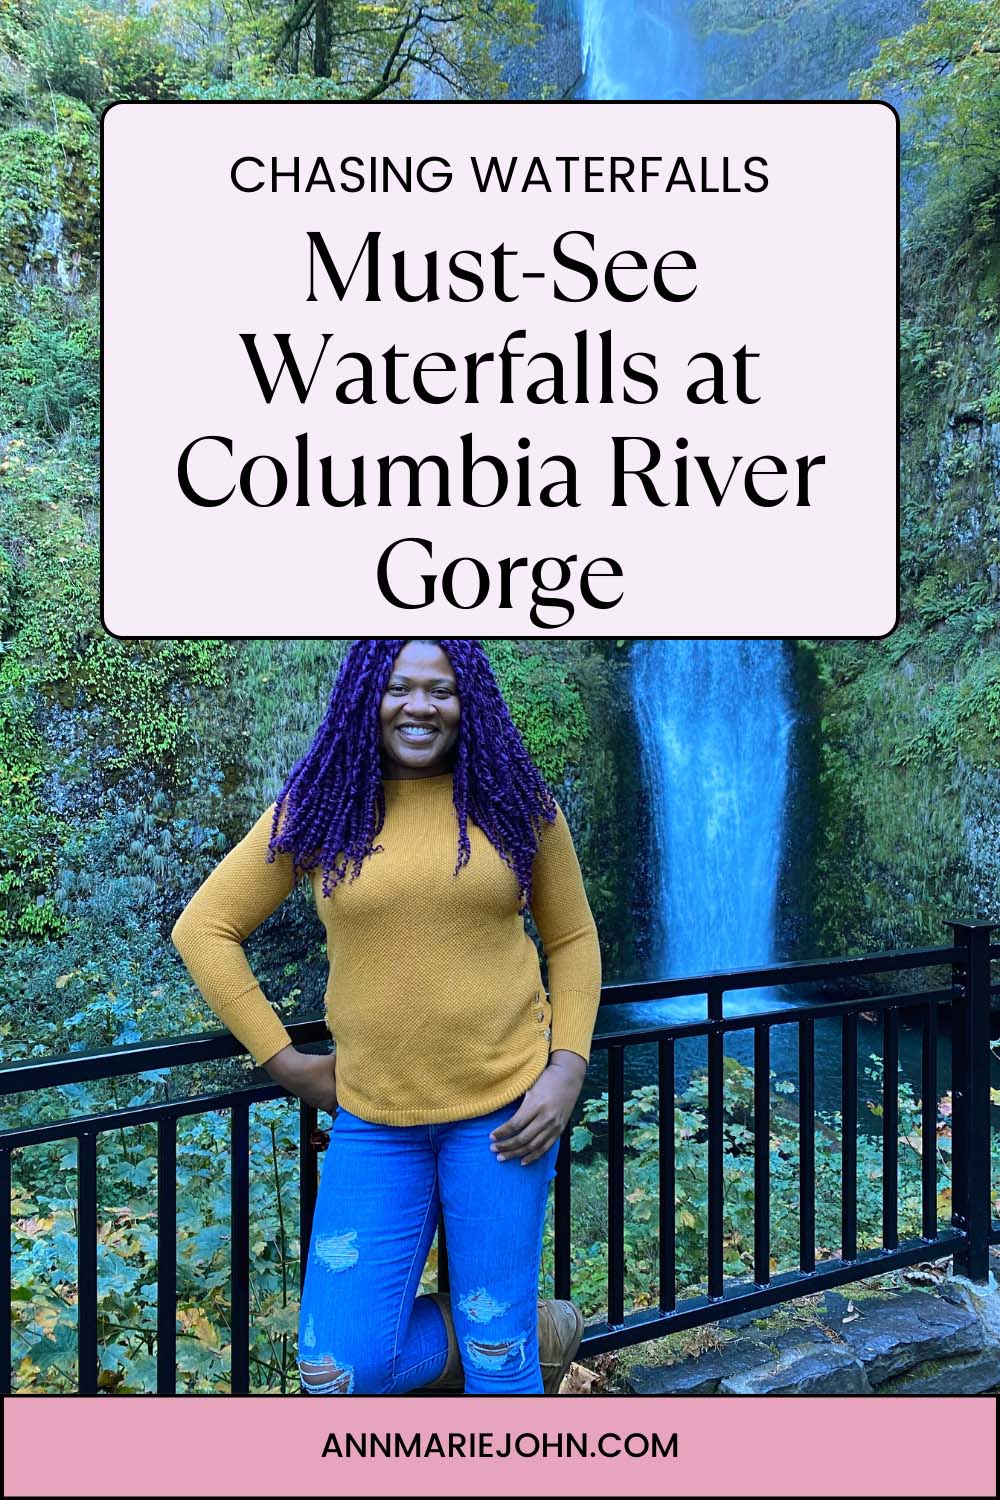 Must-See Waterfalls at Columbia River Gorge